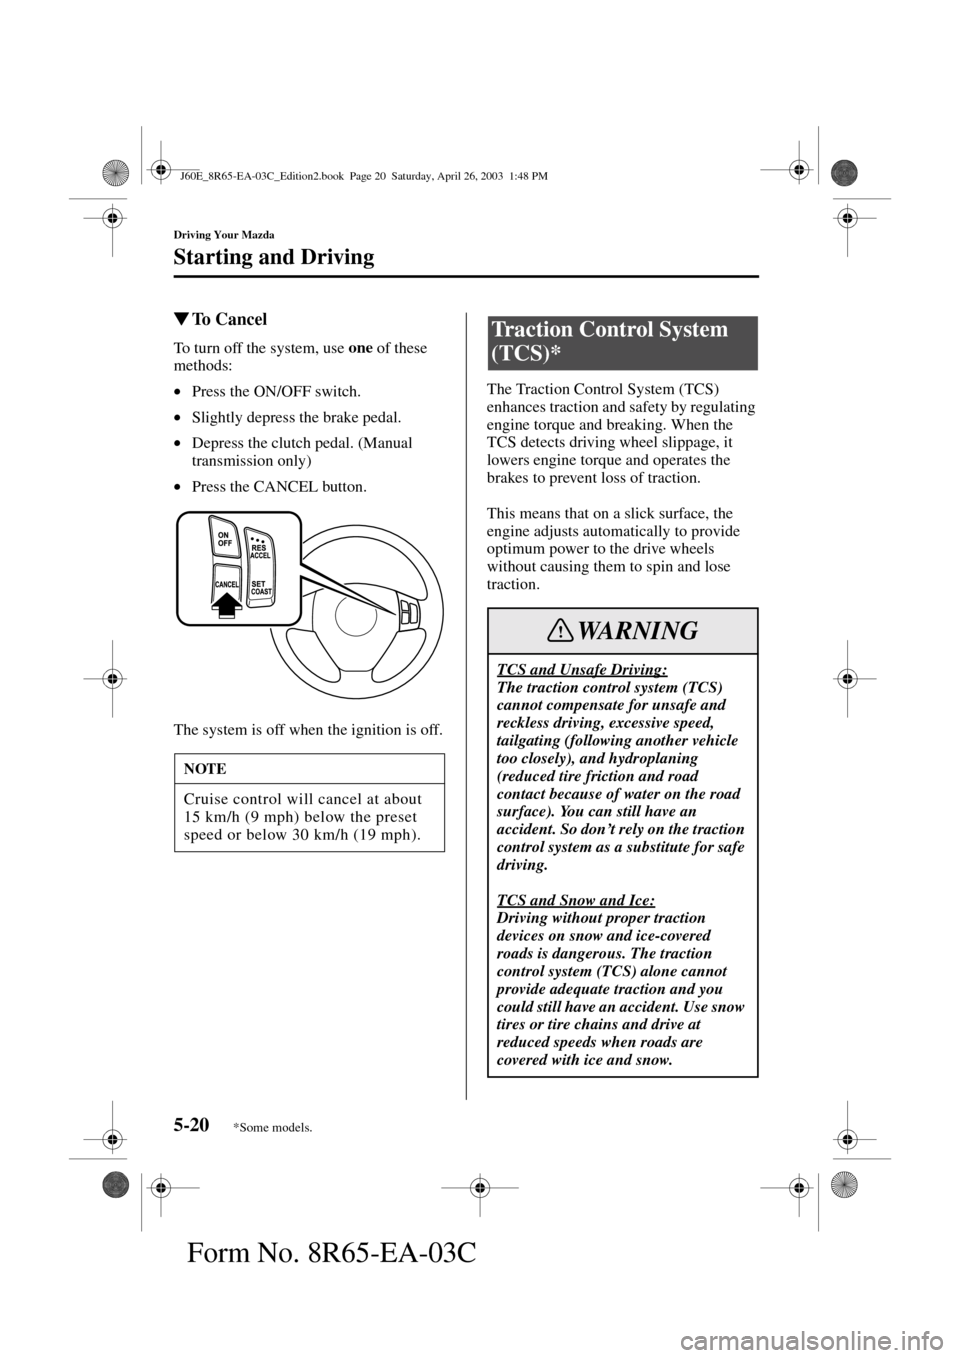 MAZDA MODEL RX 8 2004  Owners Manual (in English) 5-20
Driving Your Mazda
Starting and Driving
Form No. 8R65-EA-03C
To Cancel
To turn off the system, use one
 of these 
methods:
•Press the ON/OFF switch.
•Slightly depress the brake pedal.
•Dep